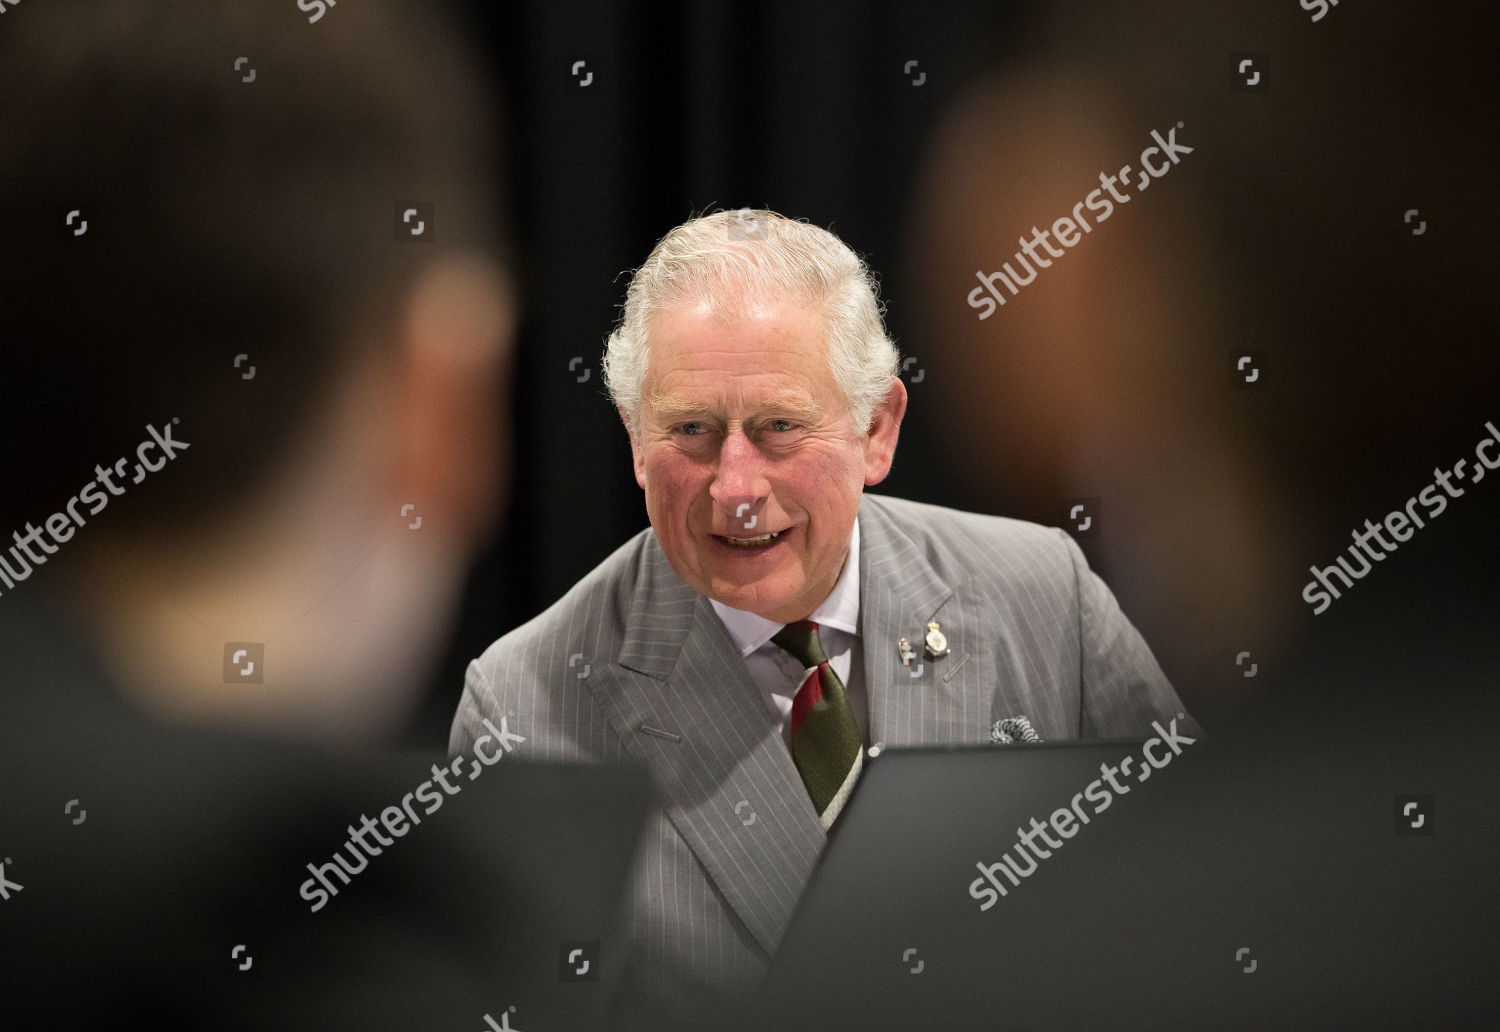 prince-charles-visit-to-wales-uk-shutterstock-editorial-10115952l.jpg